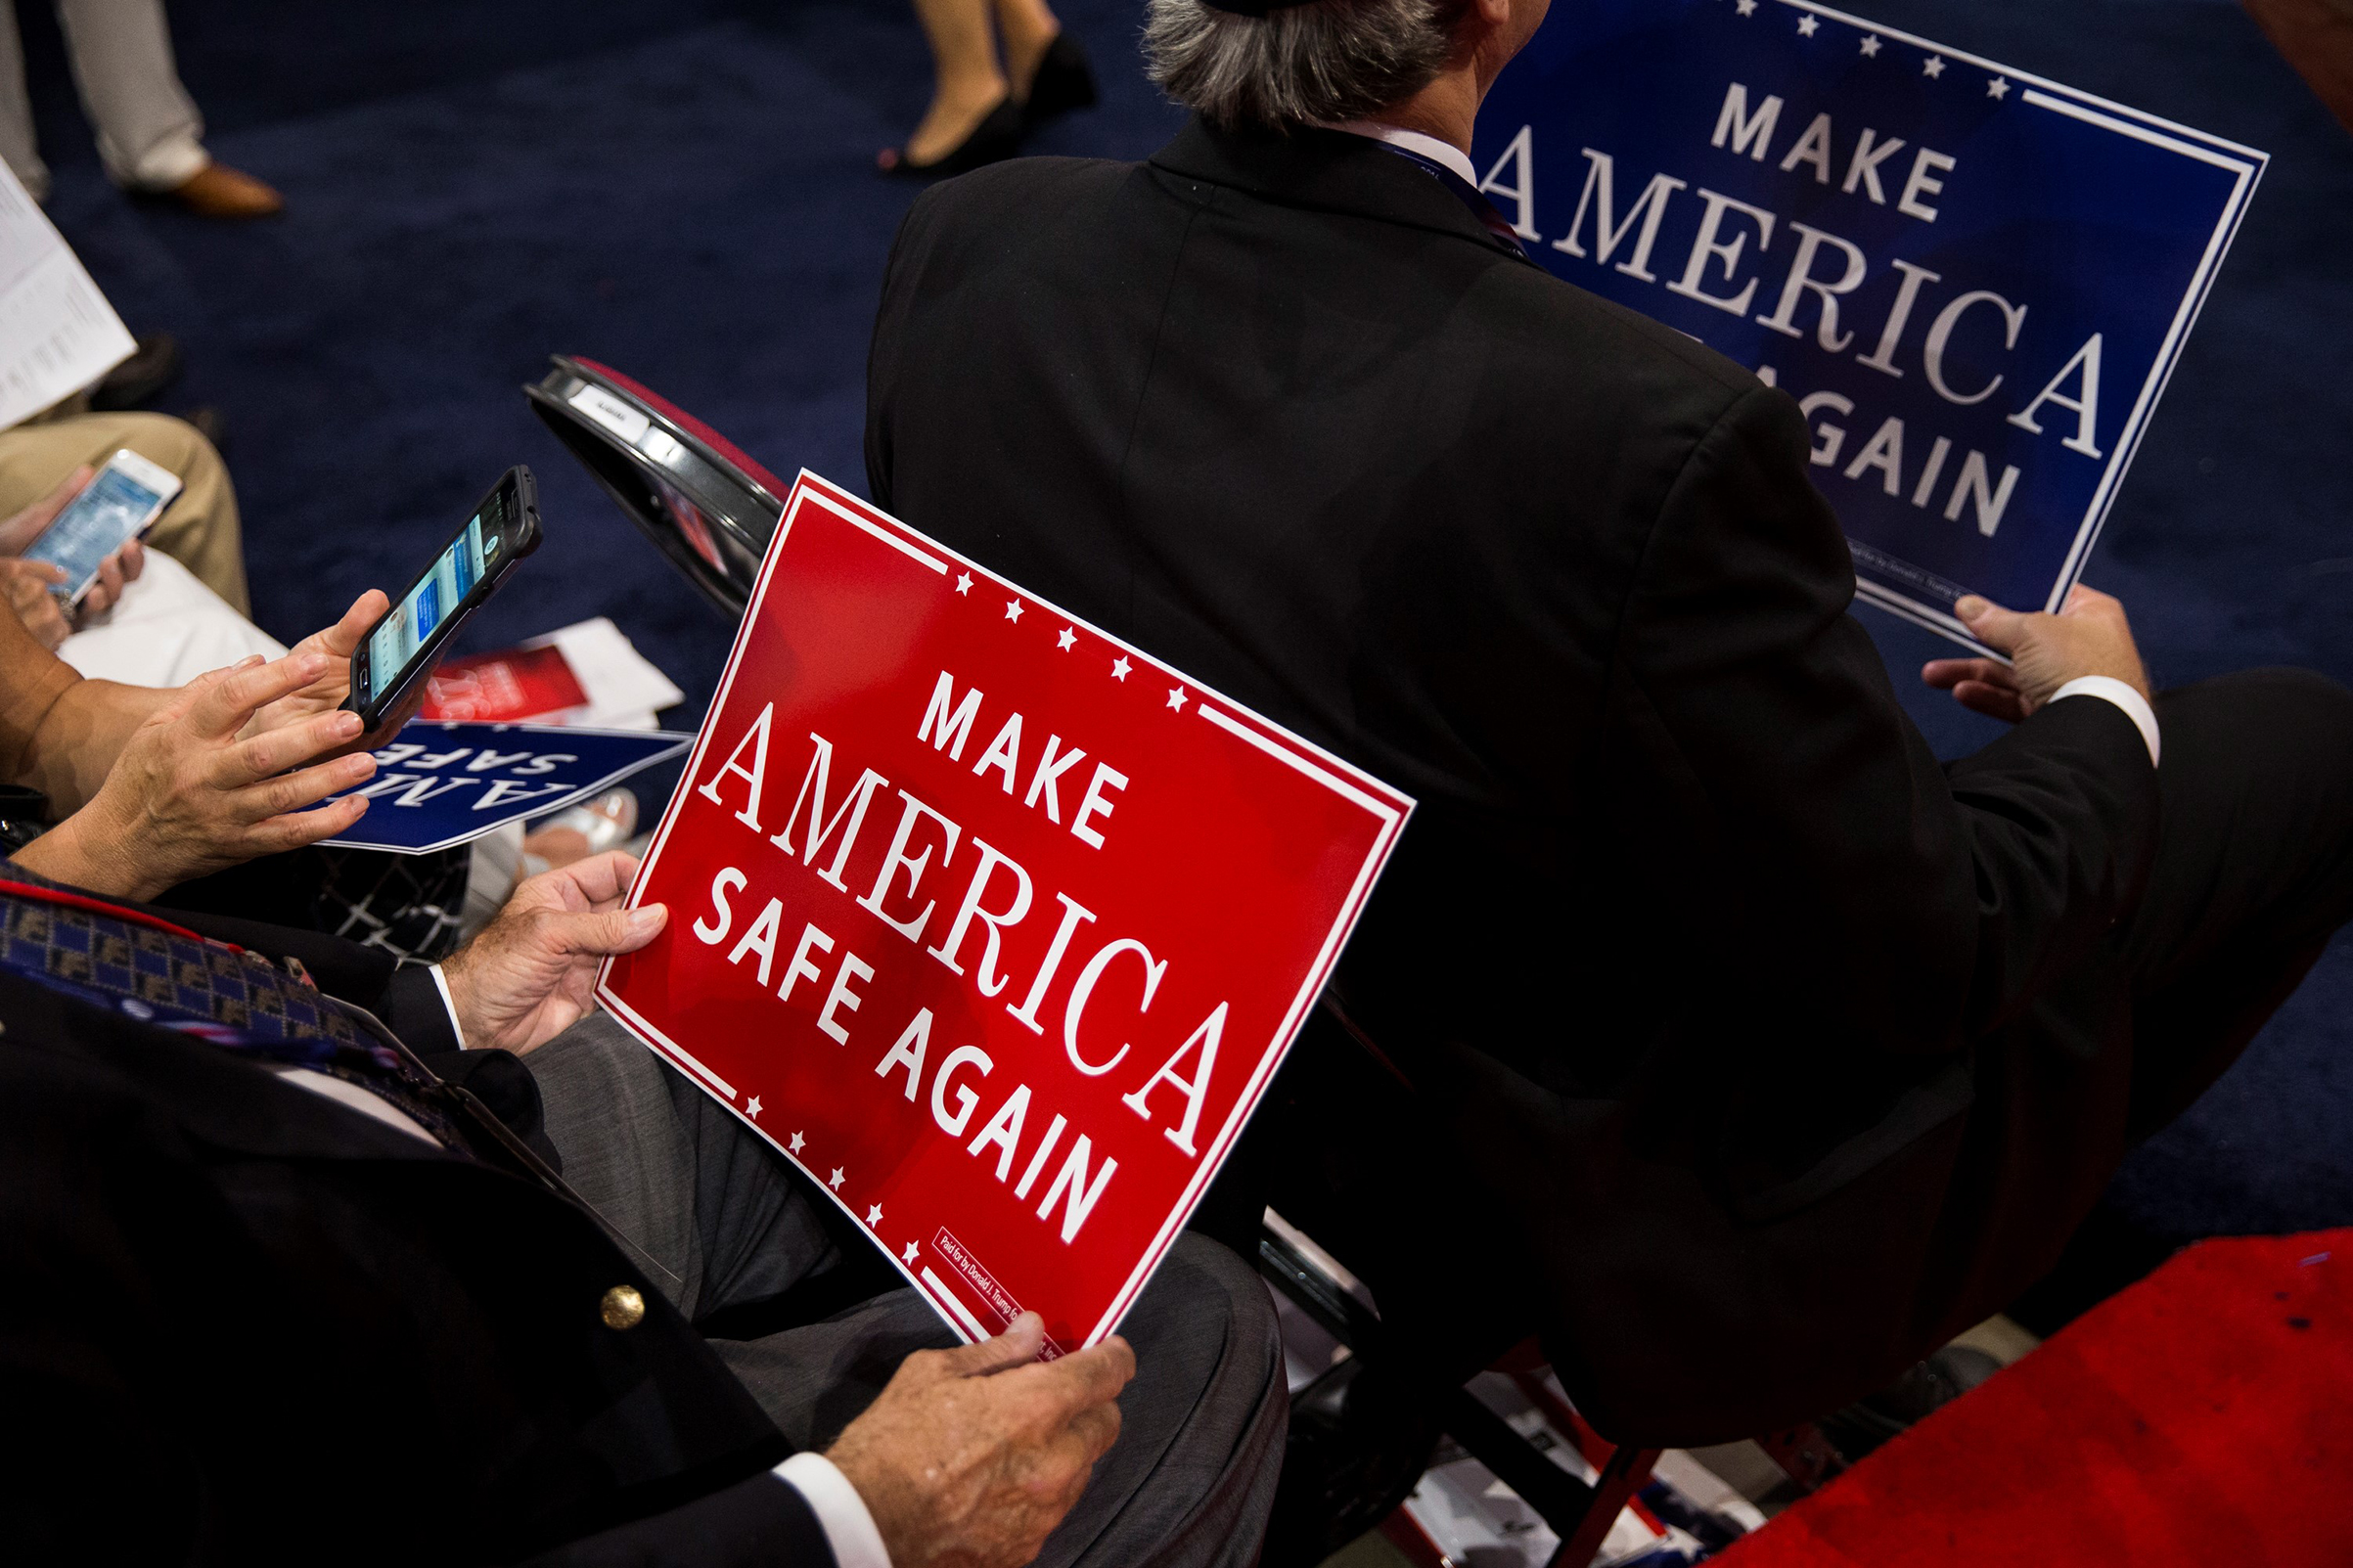 Delegates hold signs that say "Make America Safe Again", the new GOP slogan, during the 2016 Republican National Convention in Cleveland, Ohio, on July 18, 2016. (Samuel Corum—Anadolu Agency/Getty Images)